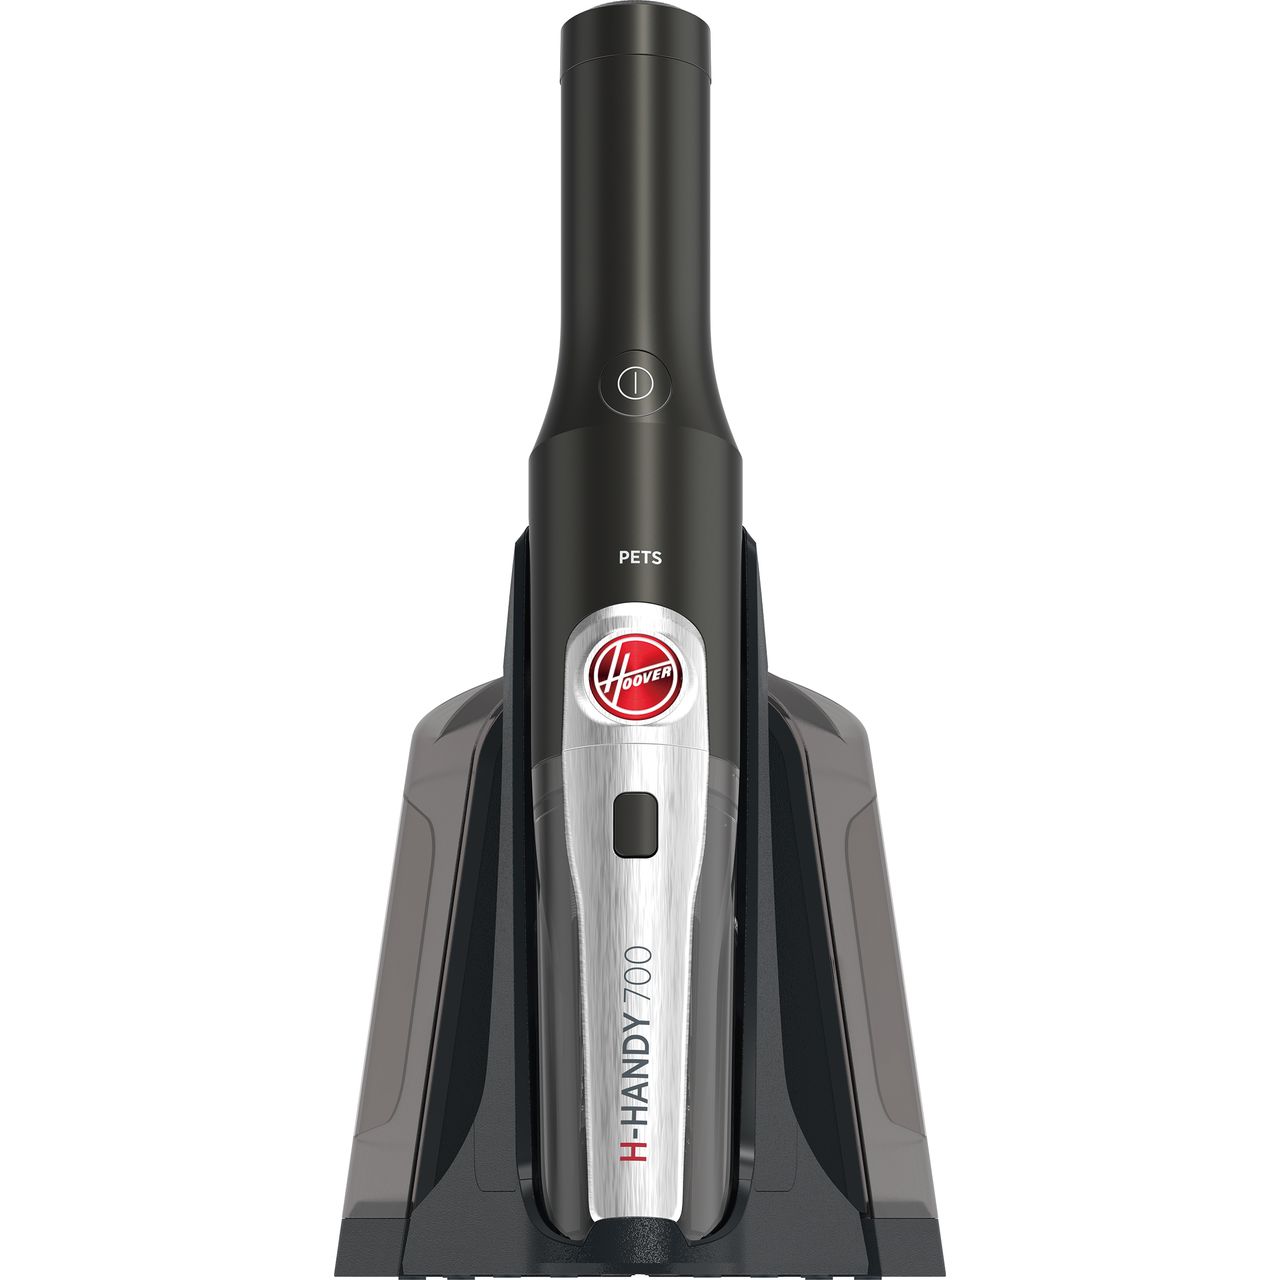 Hoover H-HANDY 700 Pets HH710TPT Handheld Vacuum Cleaner with up to 12 Minutes Run Time Review